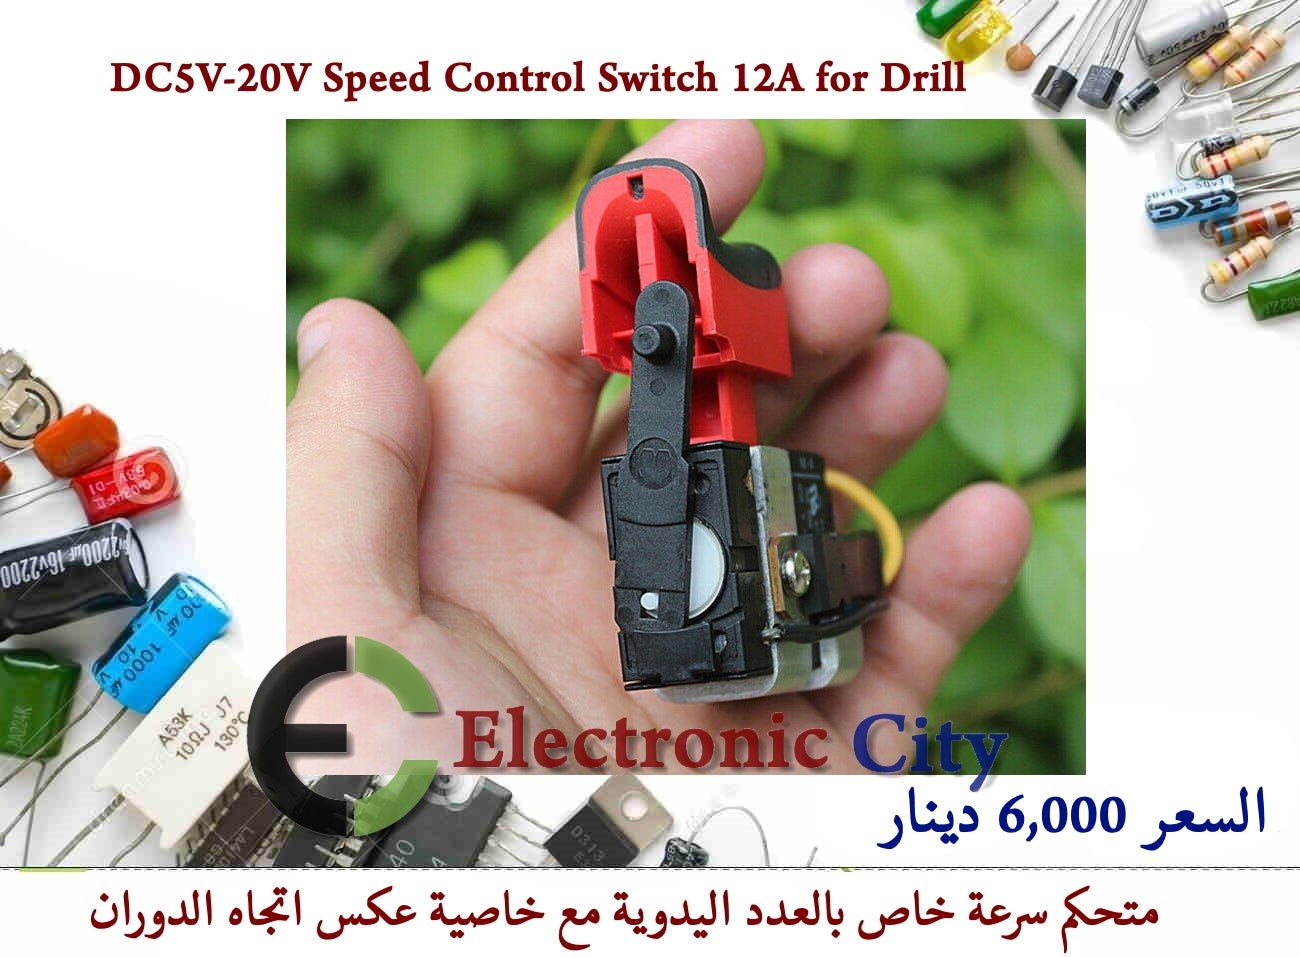 DC5V-20V Speed Control Switch 12A for Drill